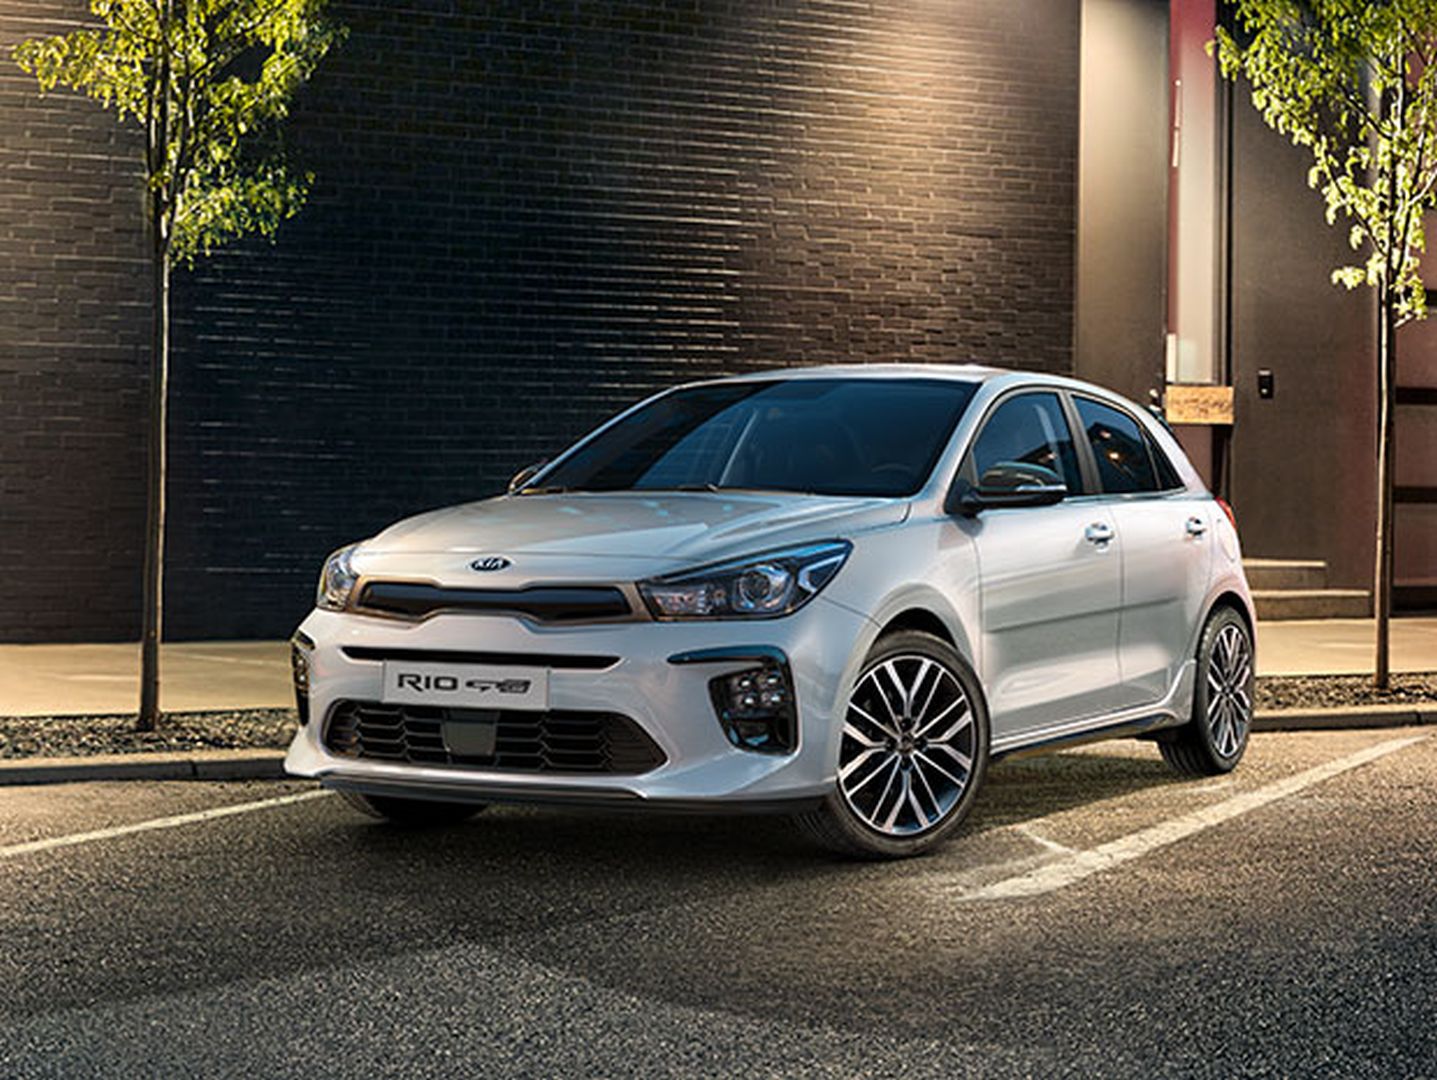 2020 Kia Rio Specs and Price: Digicars Pre-owned Car Buying Guide